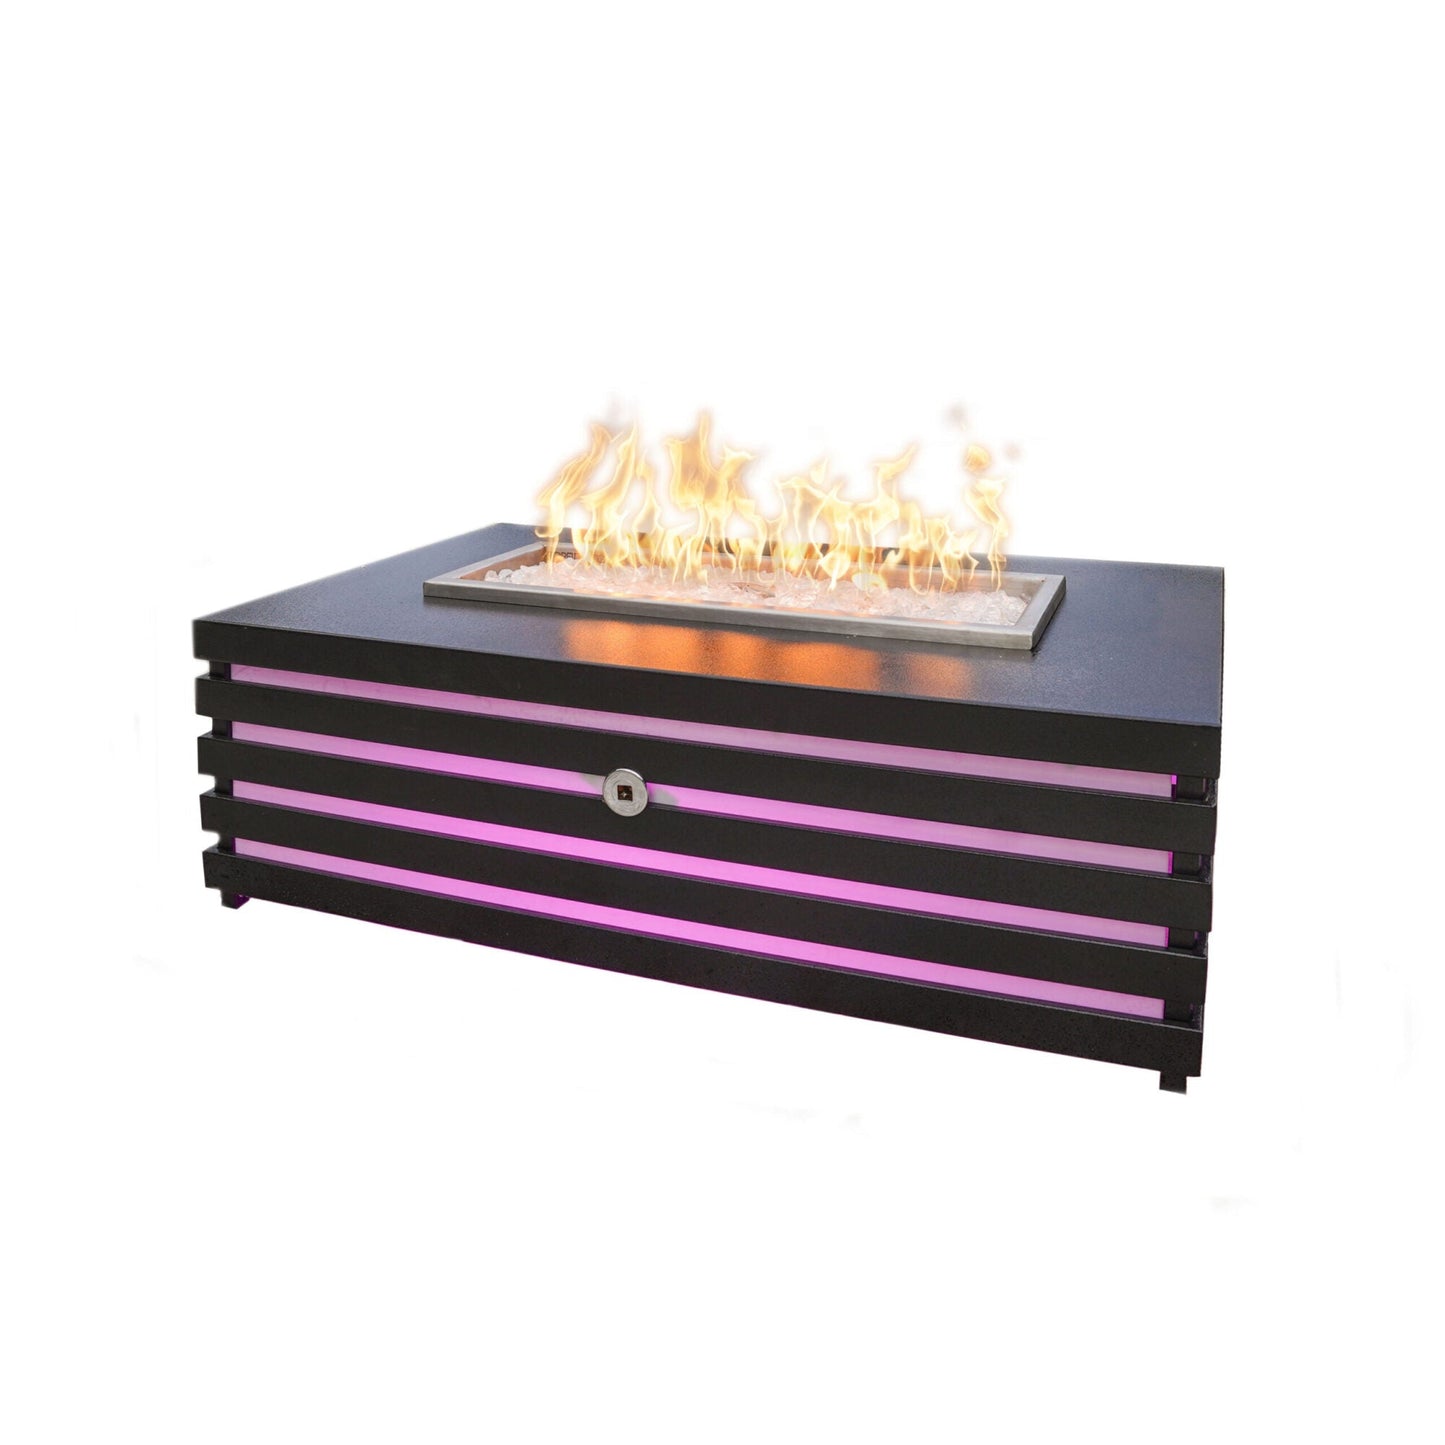 The Outdoor Plus Amina 60" Java Powder Coated Natural Gas Fire Pit with 12V Electronic Ignition